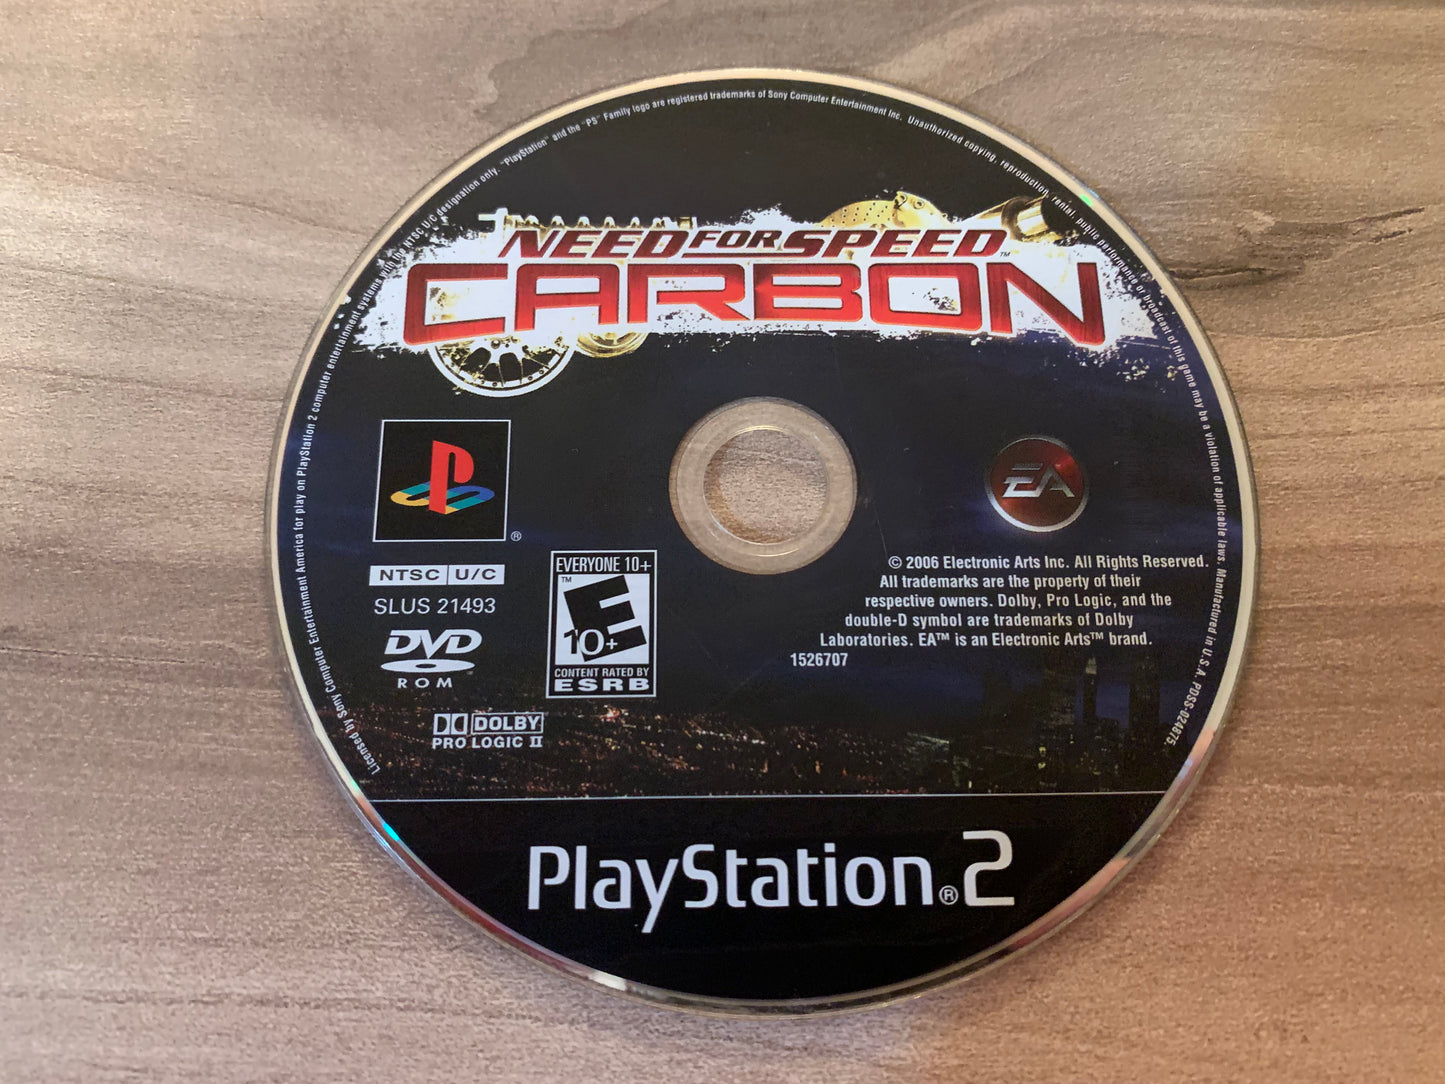 SONY PLAYSTATiON 2 [PS2] | NEED FOR SPEED CARBON